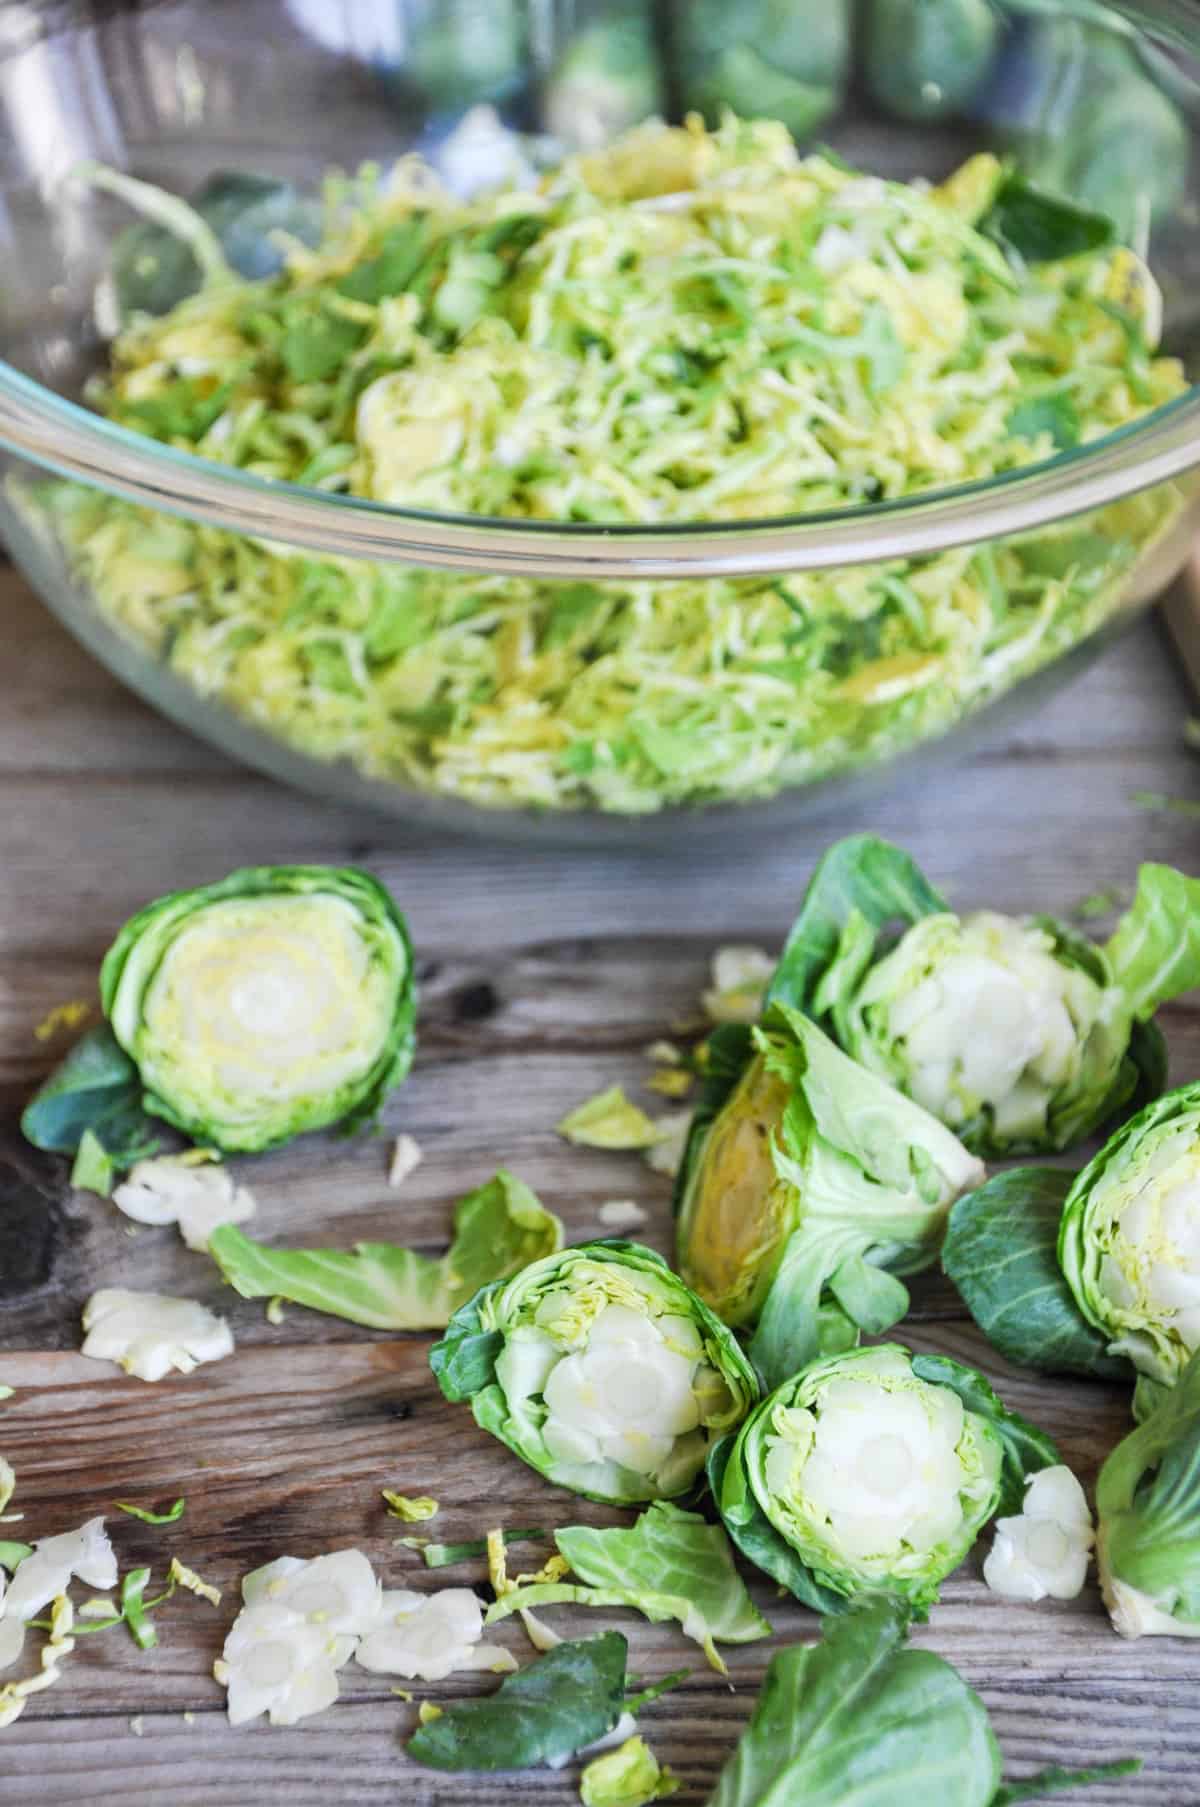 Halved Brussels Sprouts and shredded brussels sprouts in a bowl